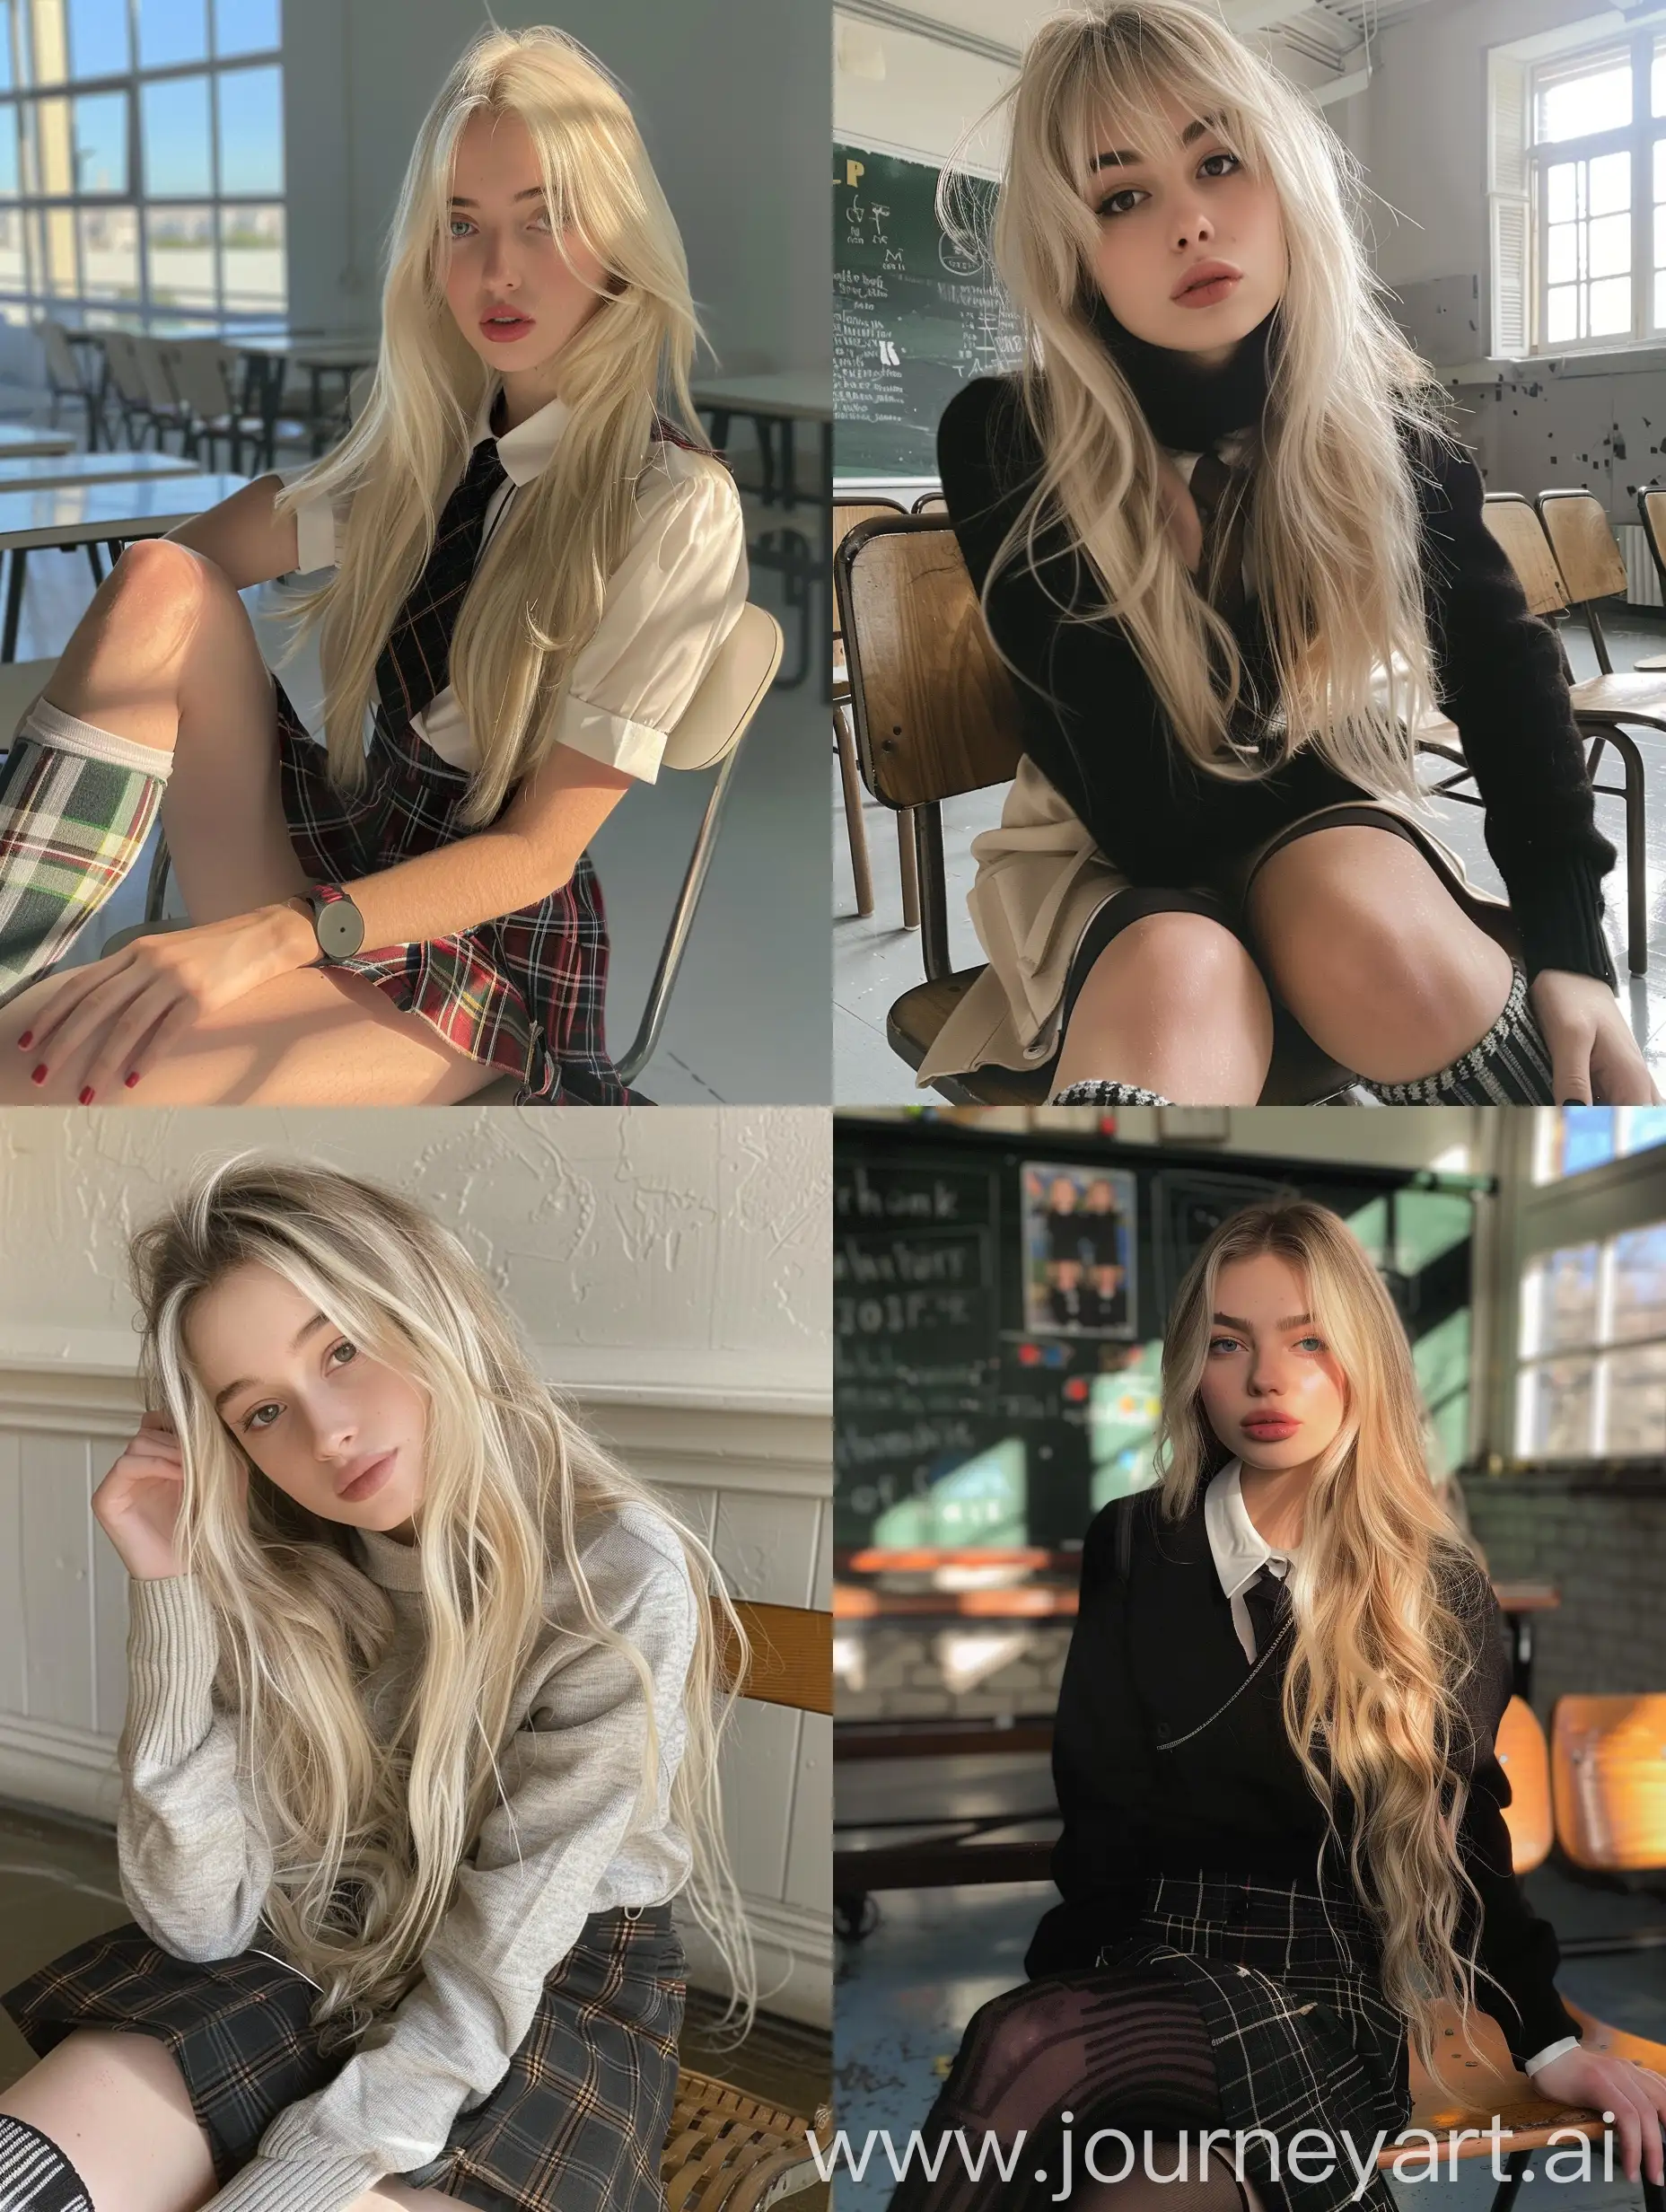 1  girl,    long  blond  hair ,   22  years  old,    influencer,    beauty   ,     in  the  school    ,school  uniform  ,  makeup,       sitting  on  chair  ,    socks  and  boots,    no  effect,     selfie   , iphone  selfie,      no  filters ,   iphone  photo    natural